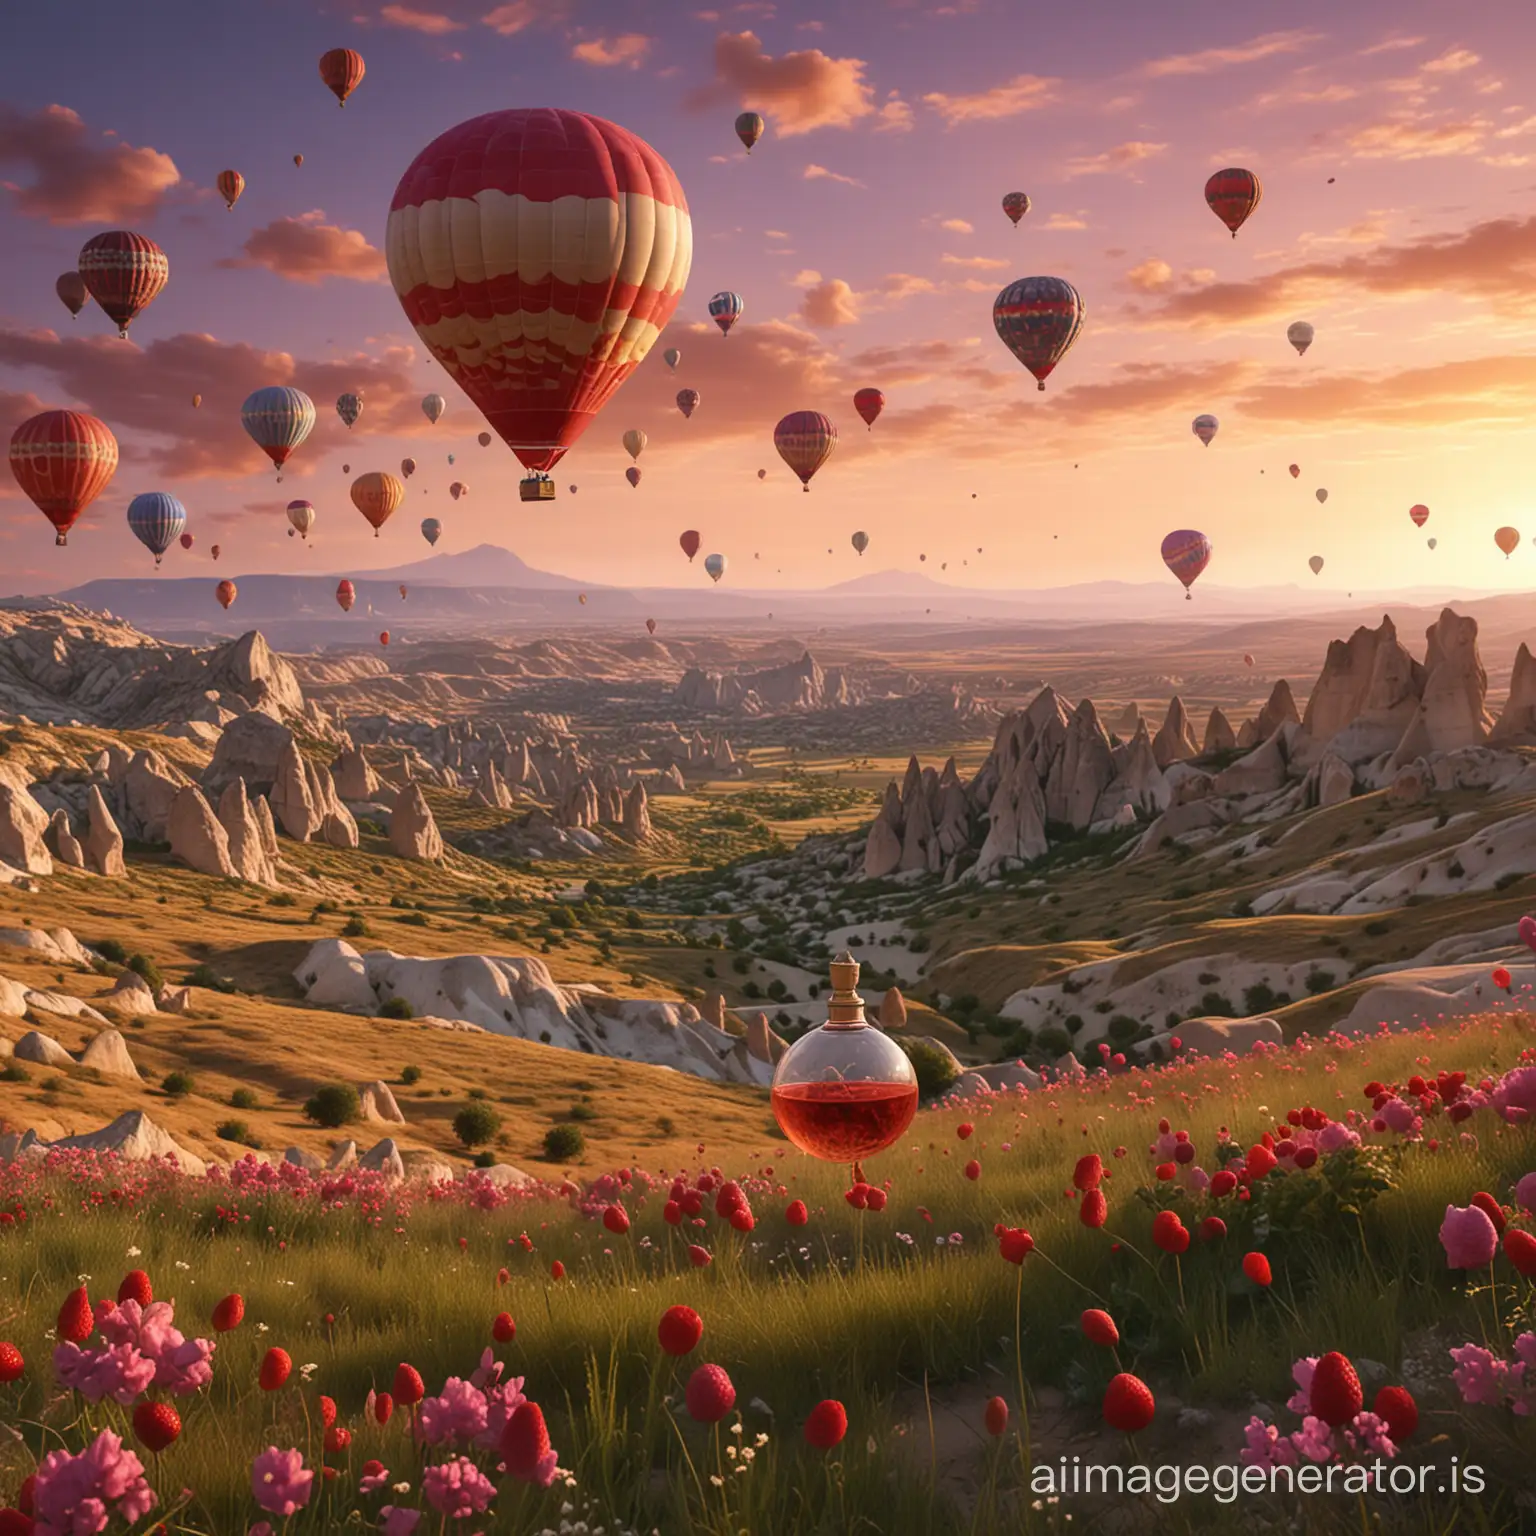 A hyper-realistic 3d rendering of a perfume product on a vast grassy expanse in Cappadocia with strawberry, lime, berry, and patchouli flowers in the background with many hot air balloons flying and a romantic atmosphere with a purplish sky.